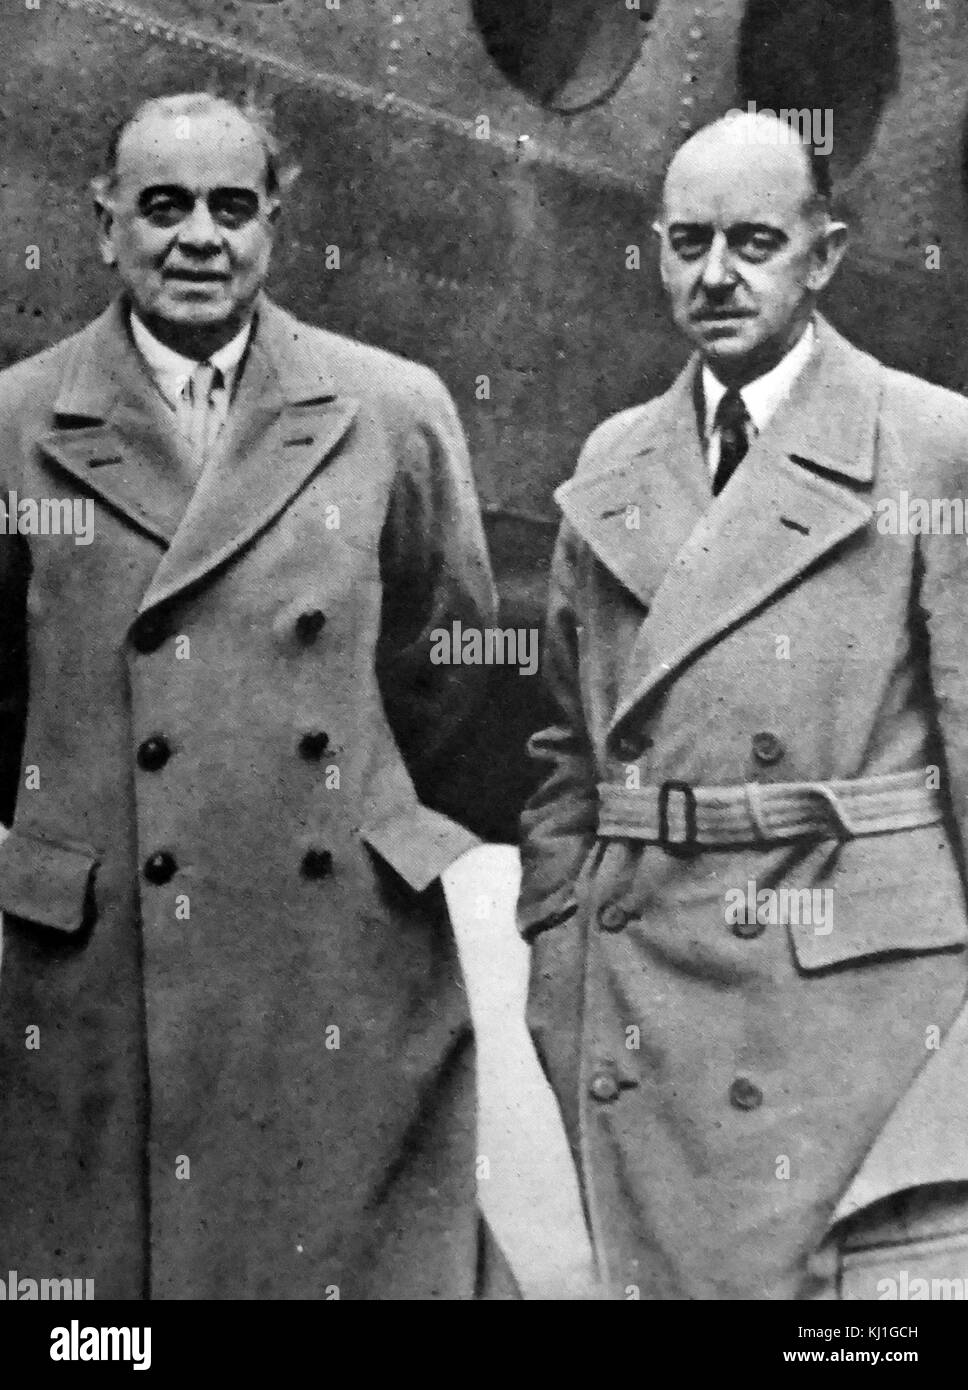 Lord Ismay and Sir Eric Mieville 1946. Sir Eric Charles Mieville, was a senior British civil servant who served as Assistant Private Secretary to George VI from 1937 to 1945, and who also served as Private Secretary to several Governors-General of India and Canada. General Hastings Lionel Ismay, 1st Baron Ismay, was a British Indian Army officer and diplomat, remembered primarily for his role as Winston Churchill's chief military assistant during the Second World War and his service as the first Secretary General of NATO from 1952 to 1957. Stock Photo